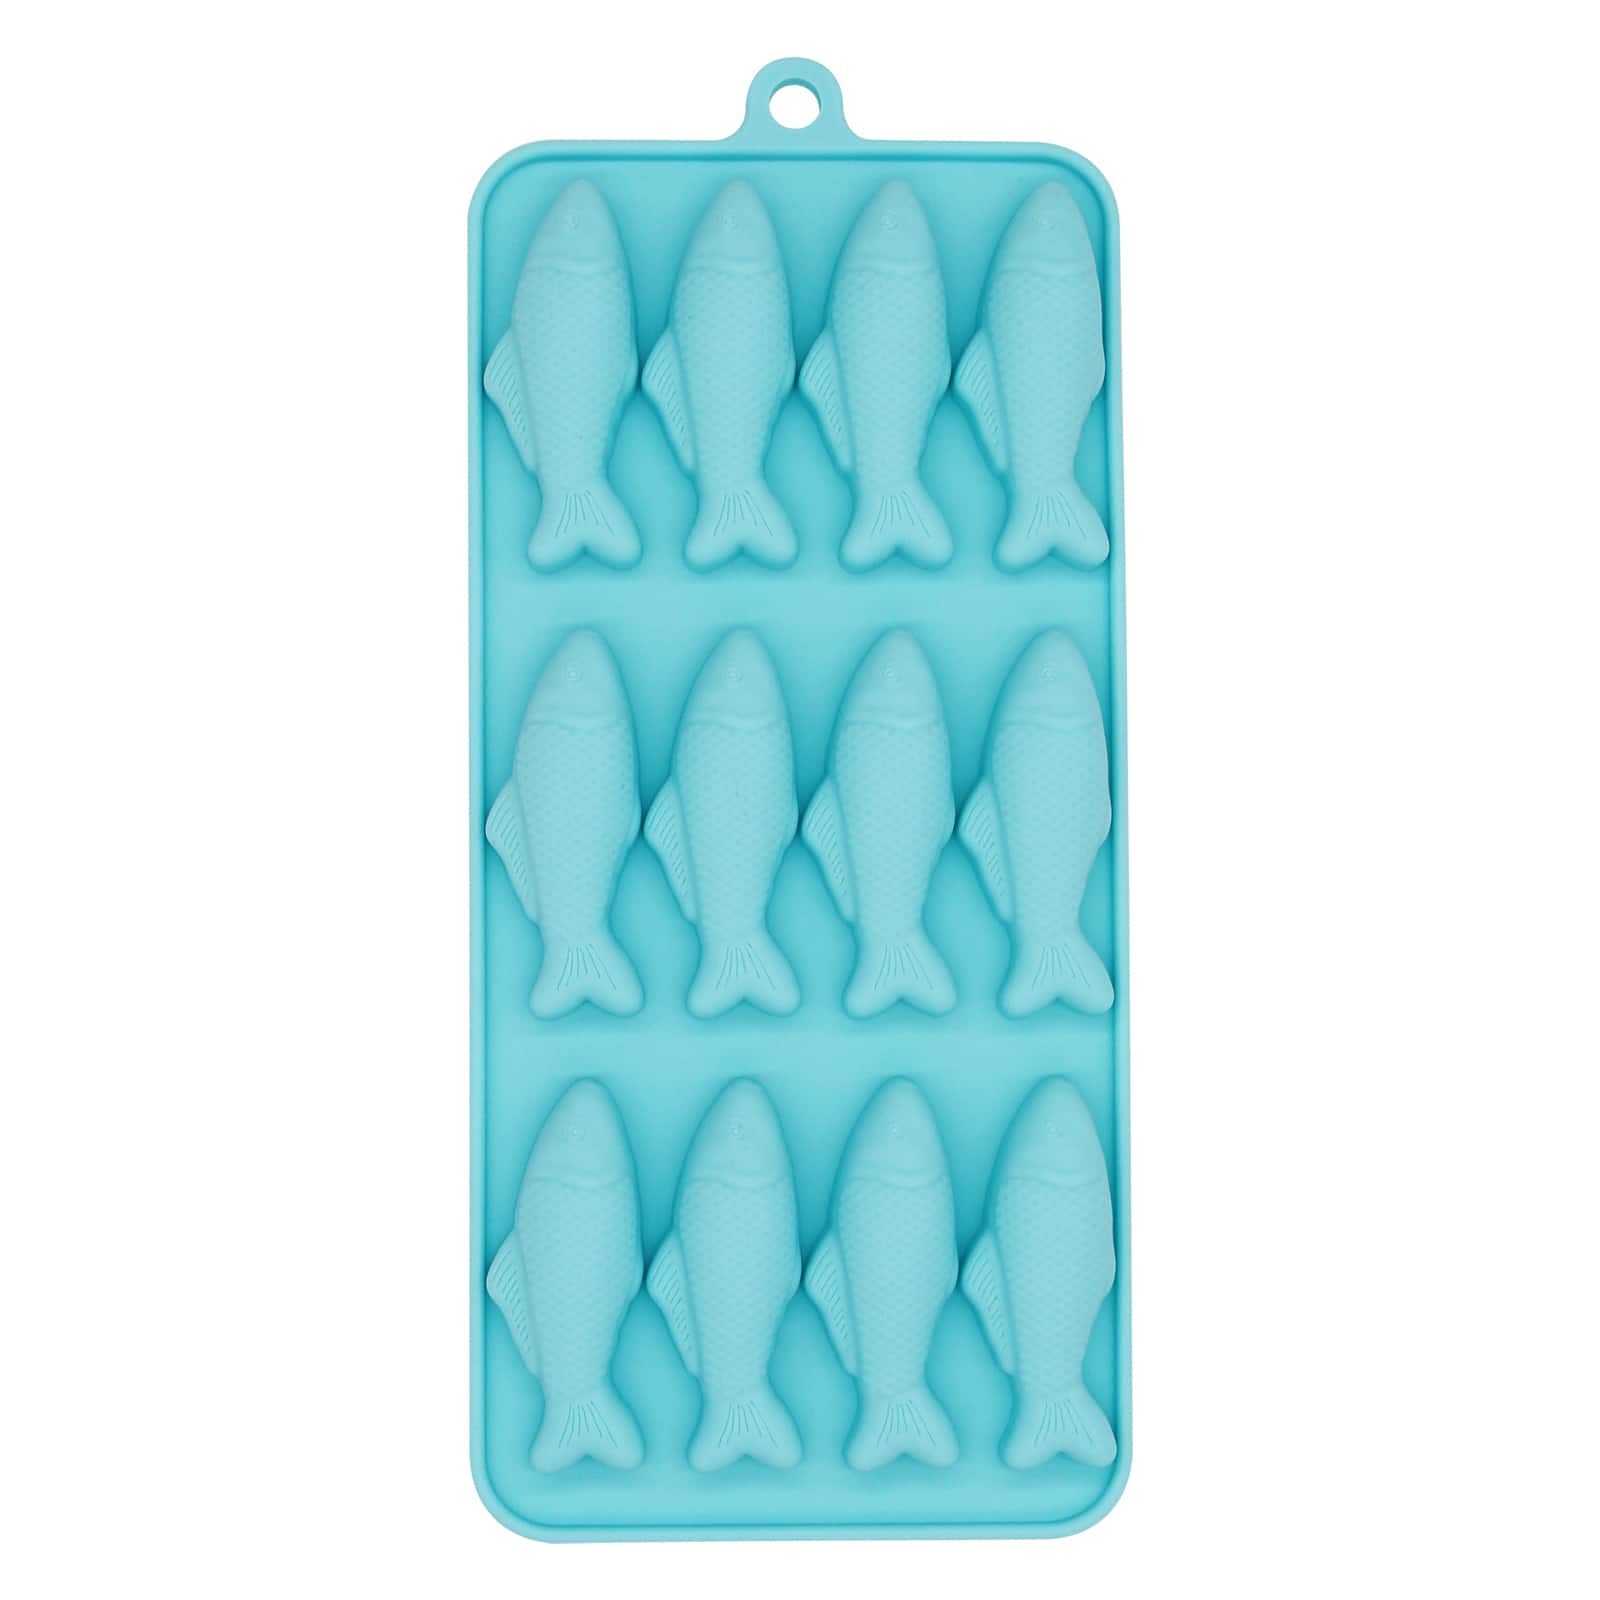 Celebrate It Fish Silicone Candy Mold - each